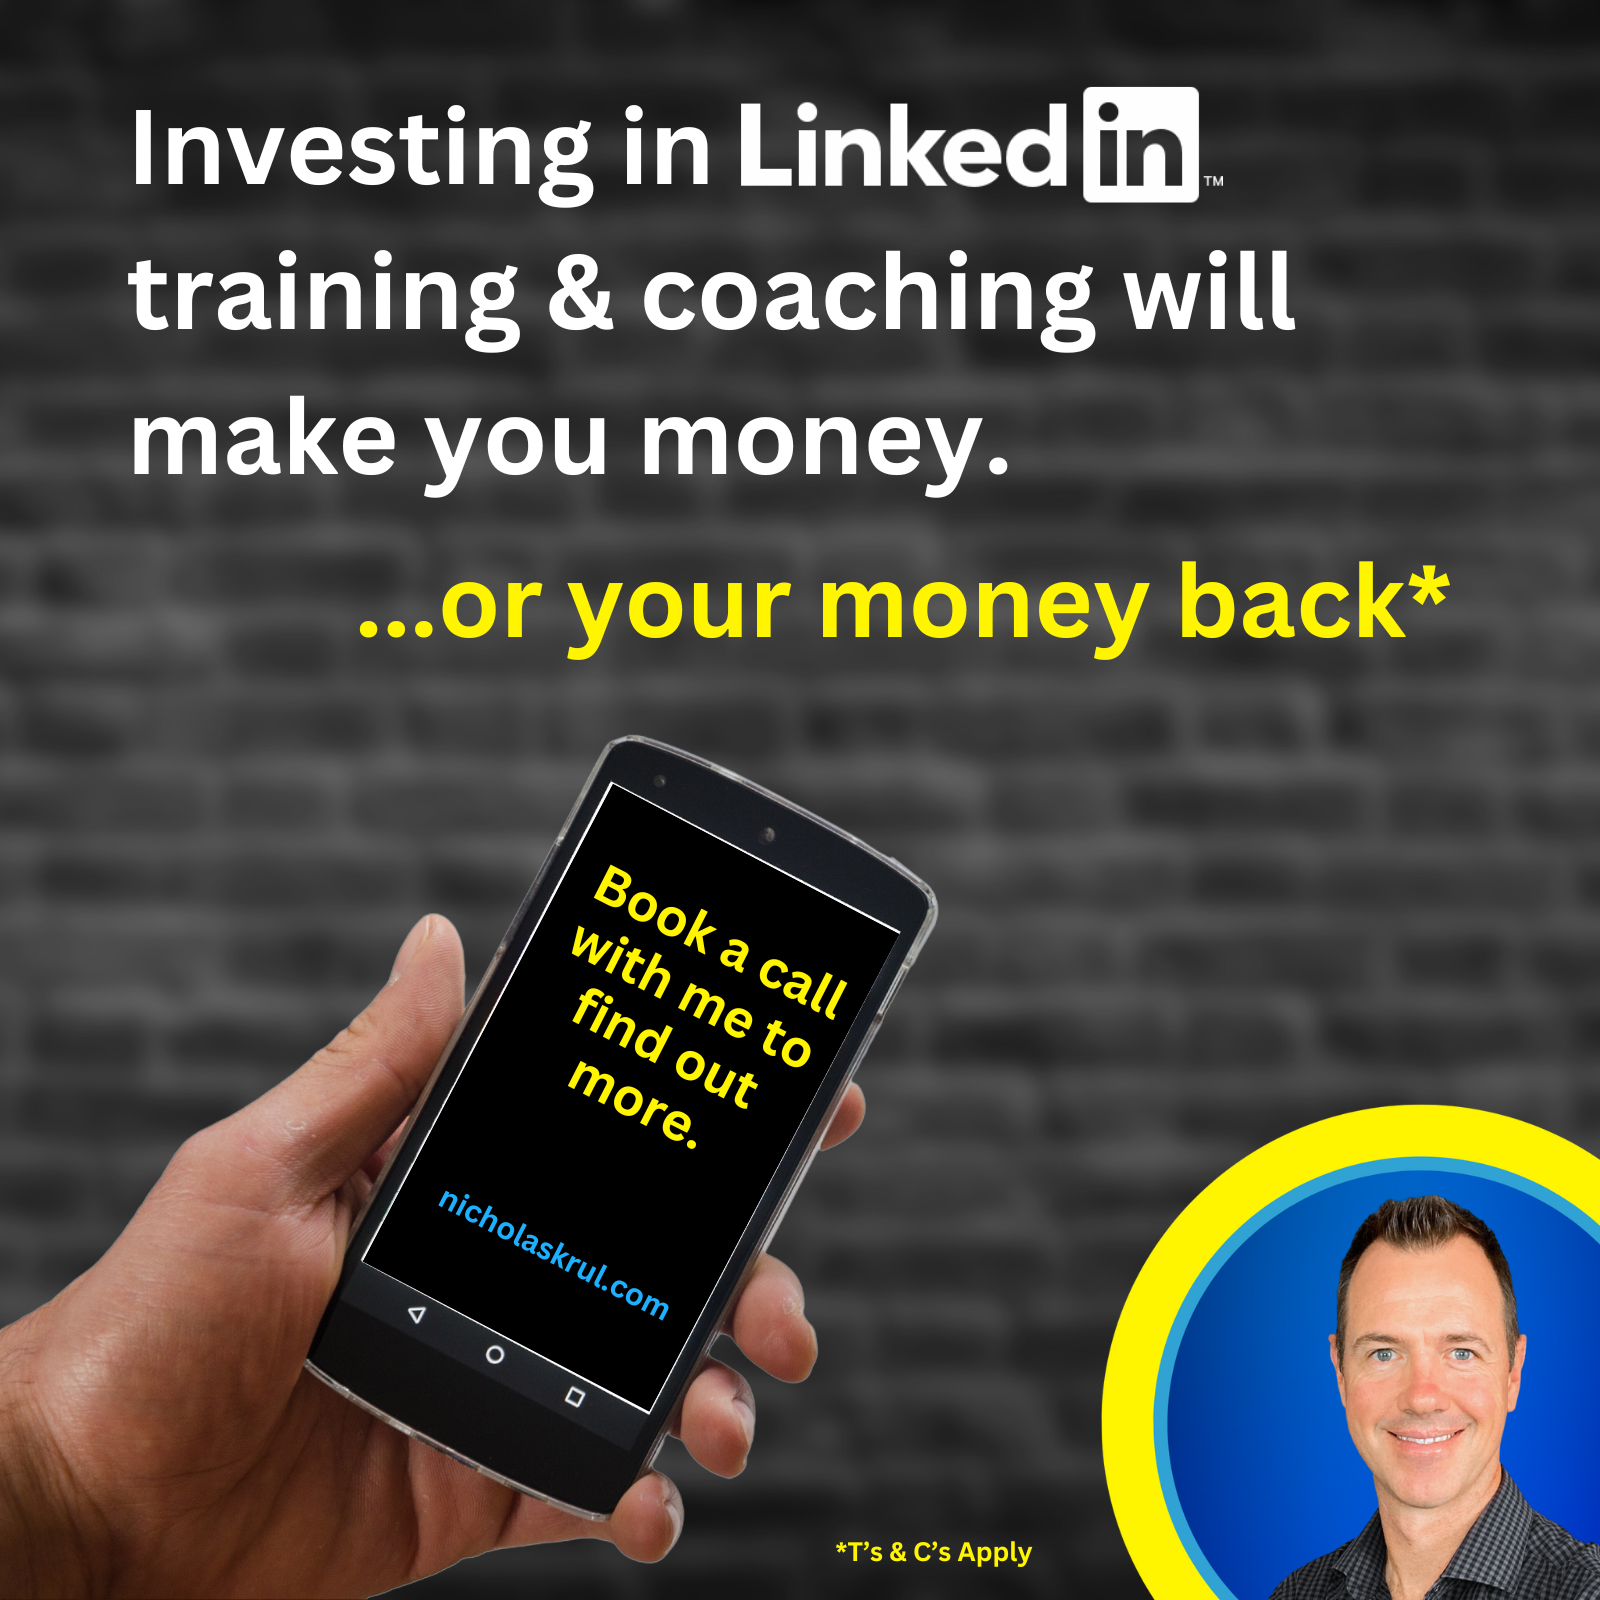 Investing in LinkedIn training will make you more money